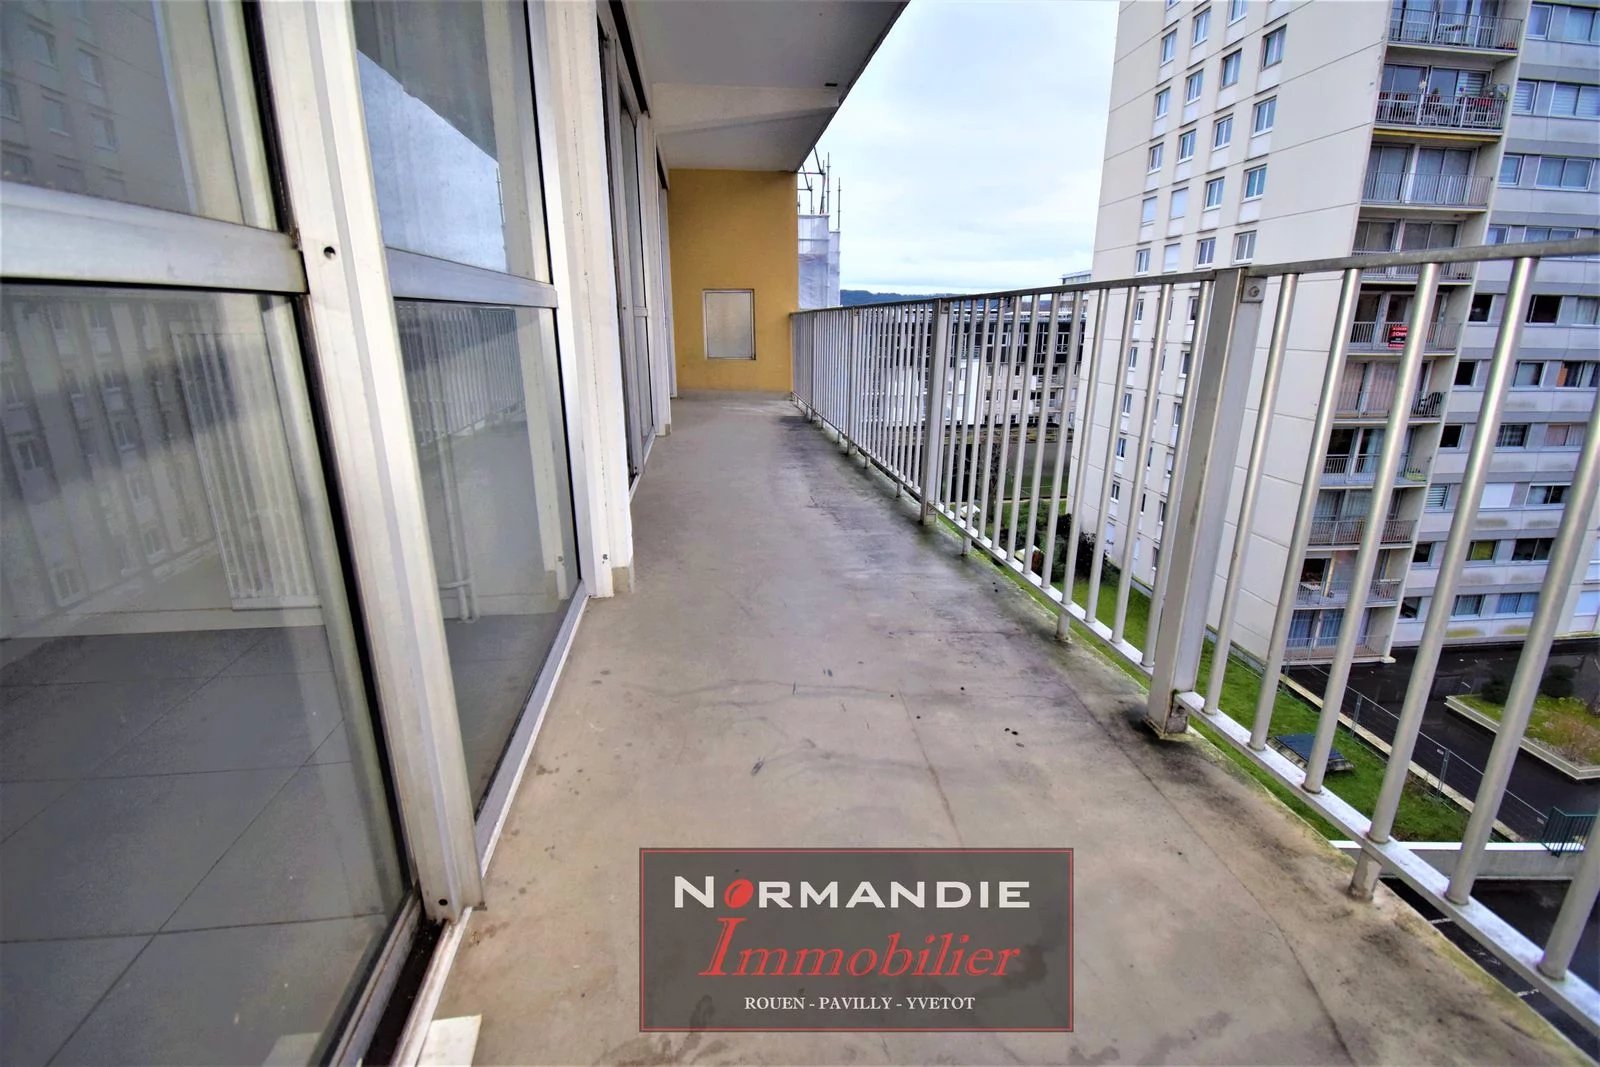 Appartement  104 m²  4  chambres +  2 SDB  + parking